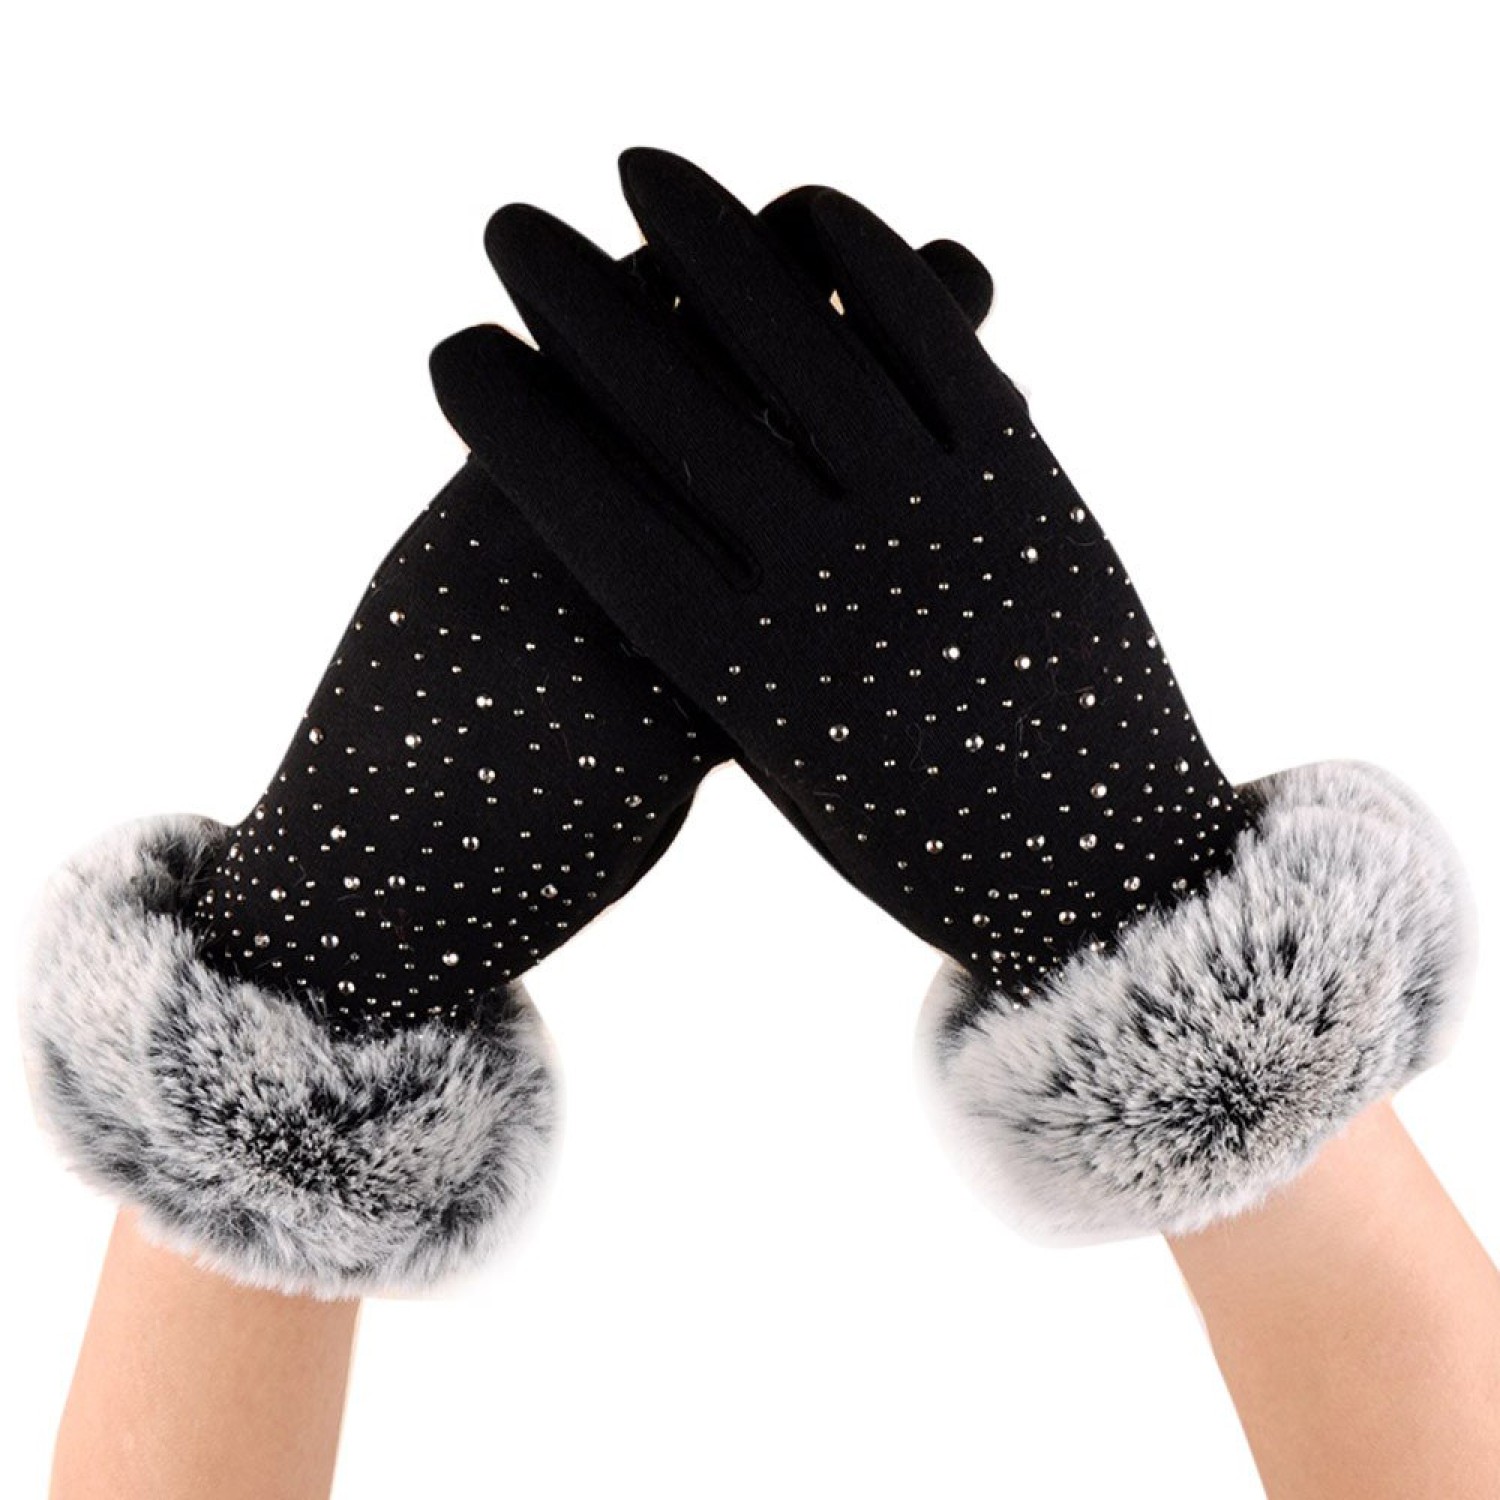  Best Women 100% Real Leather Gloves Lady Winter Warm Fashion with Real Fur